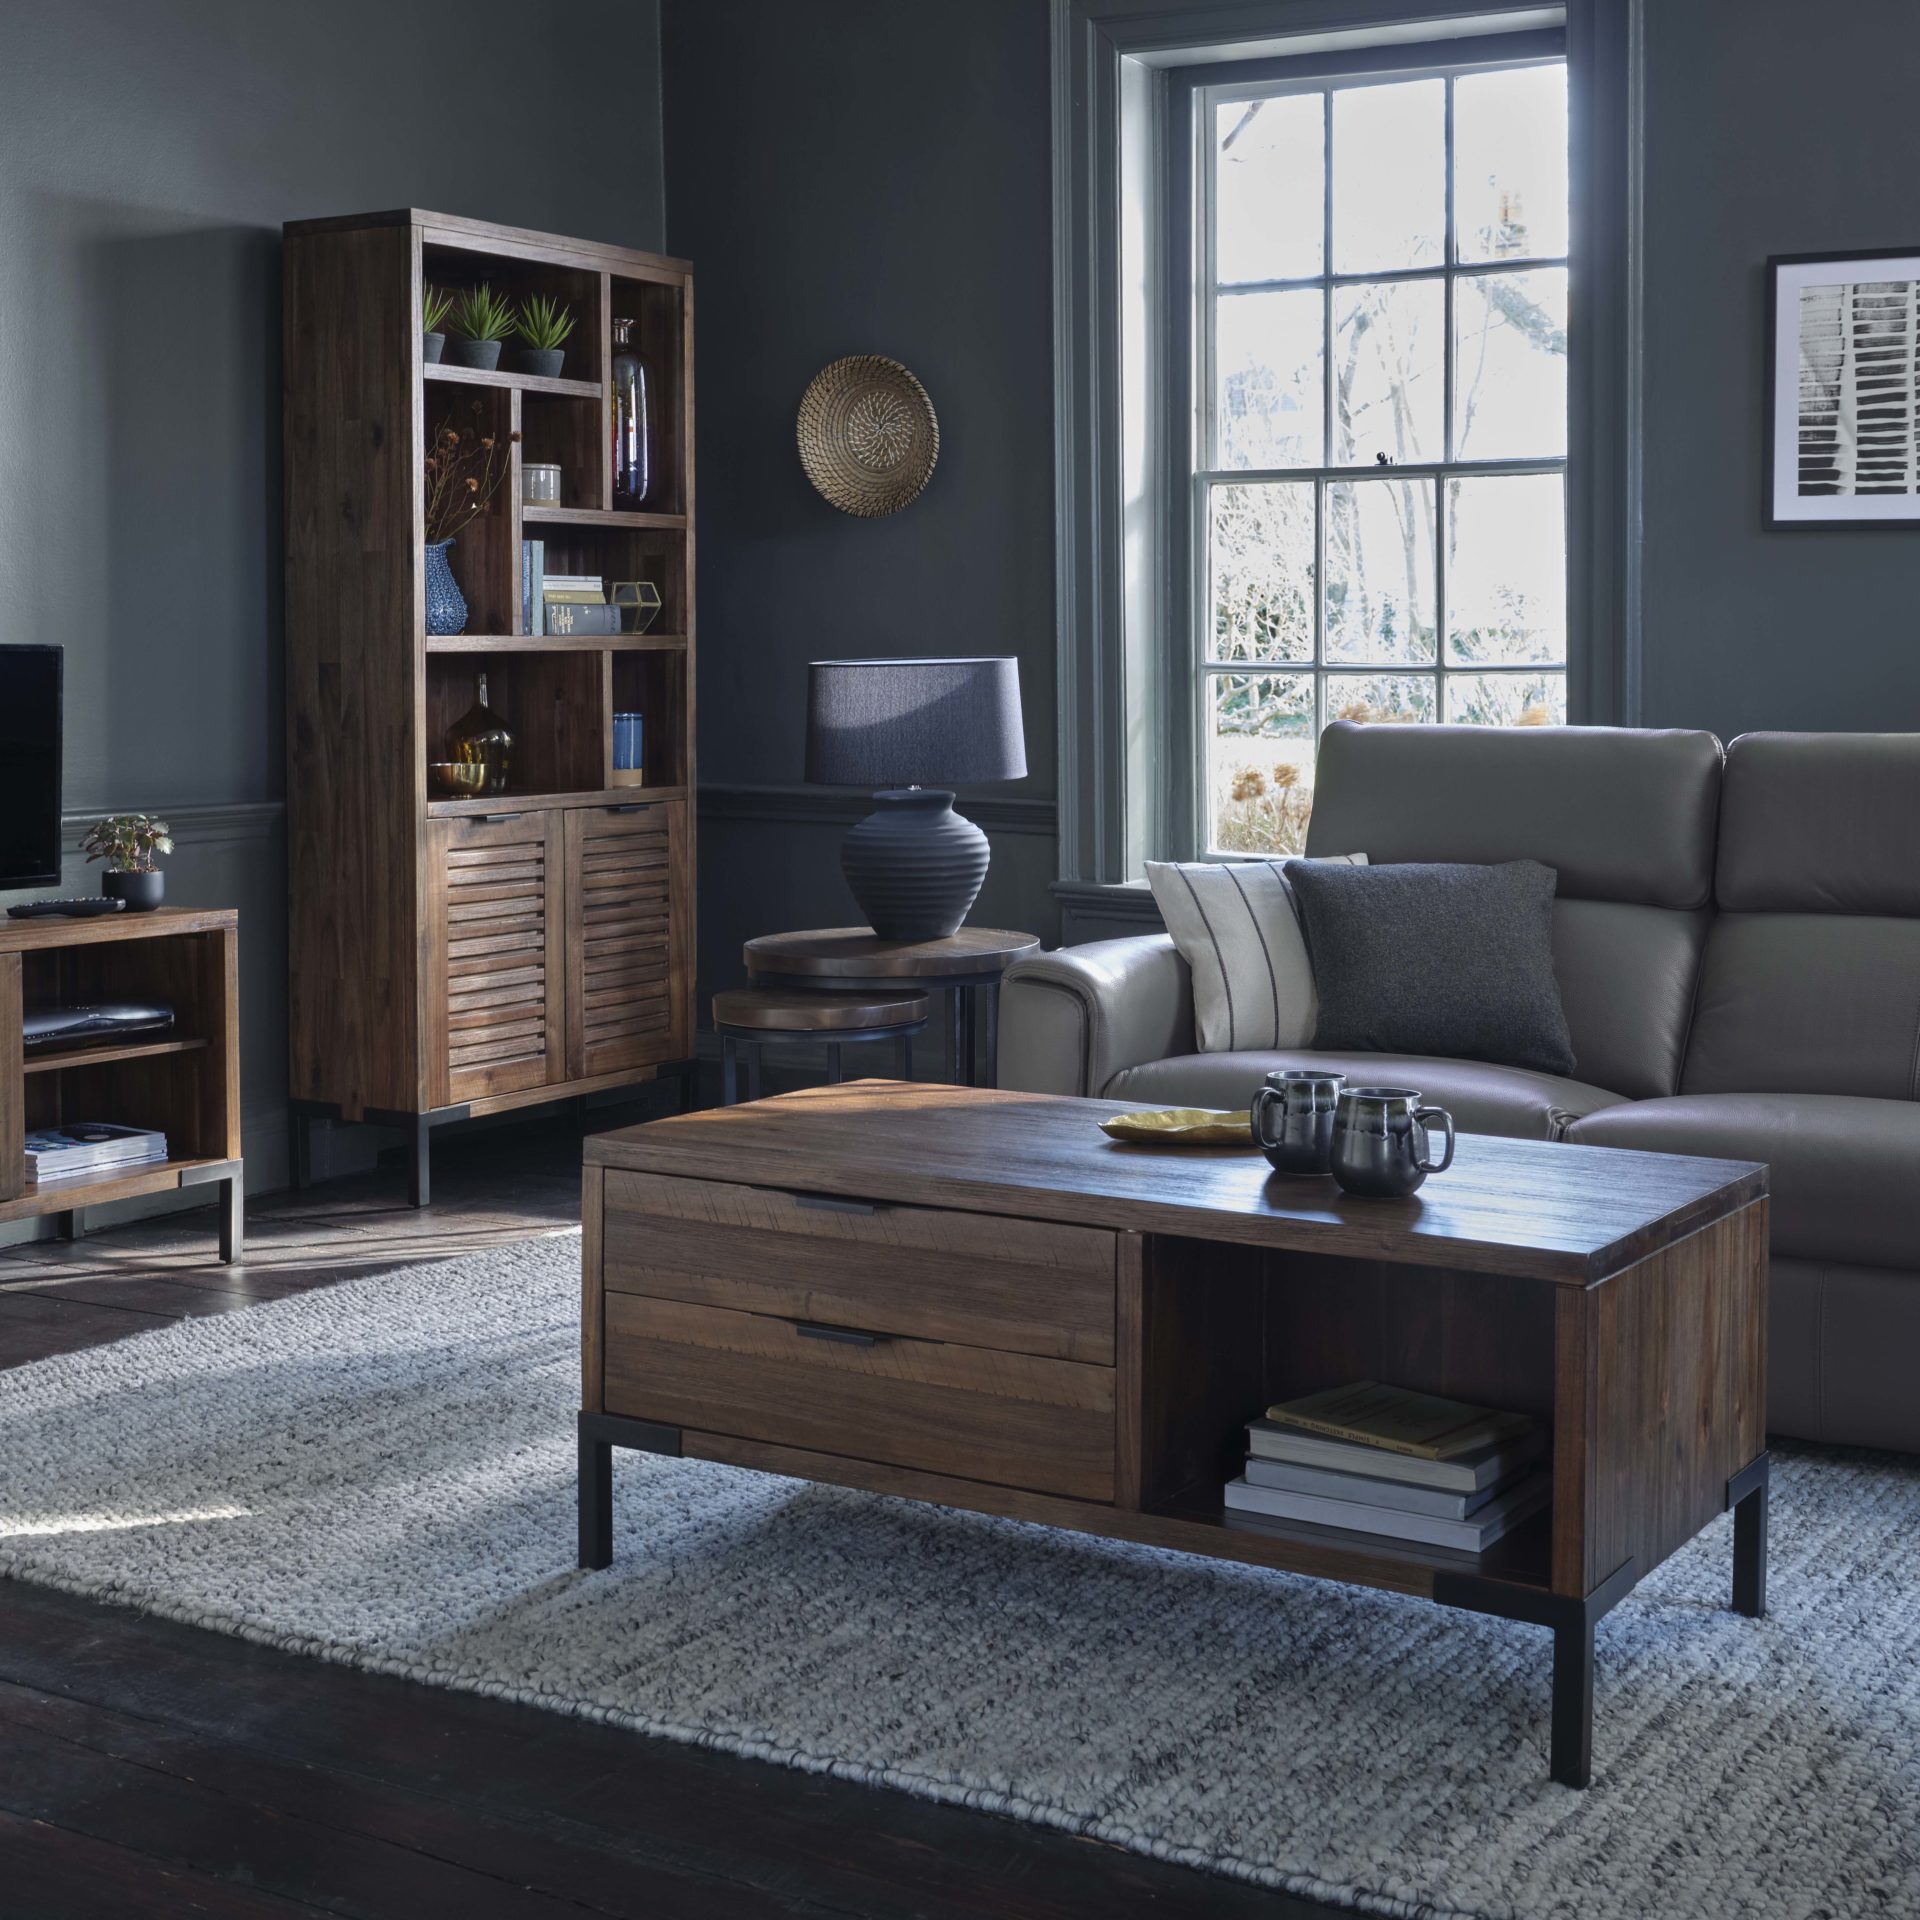 Styling the Detroit collection | The Oak Furnitureland Blog